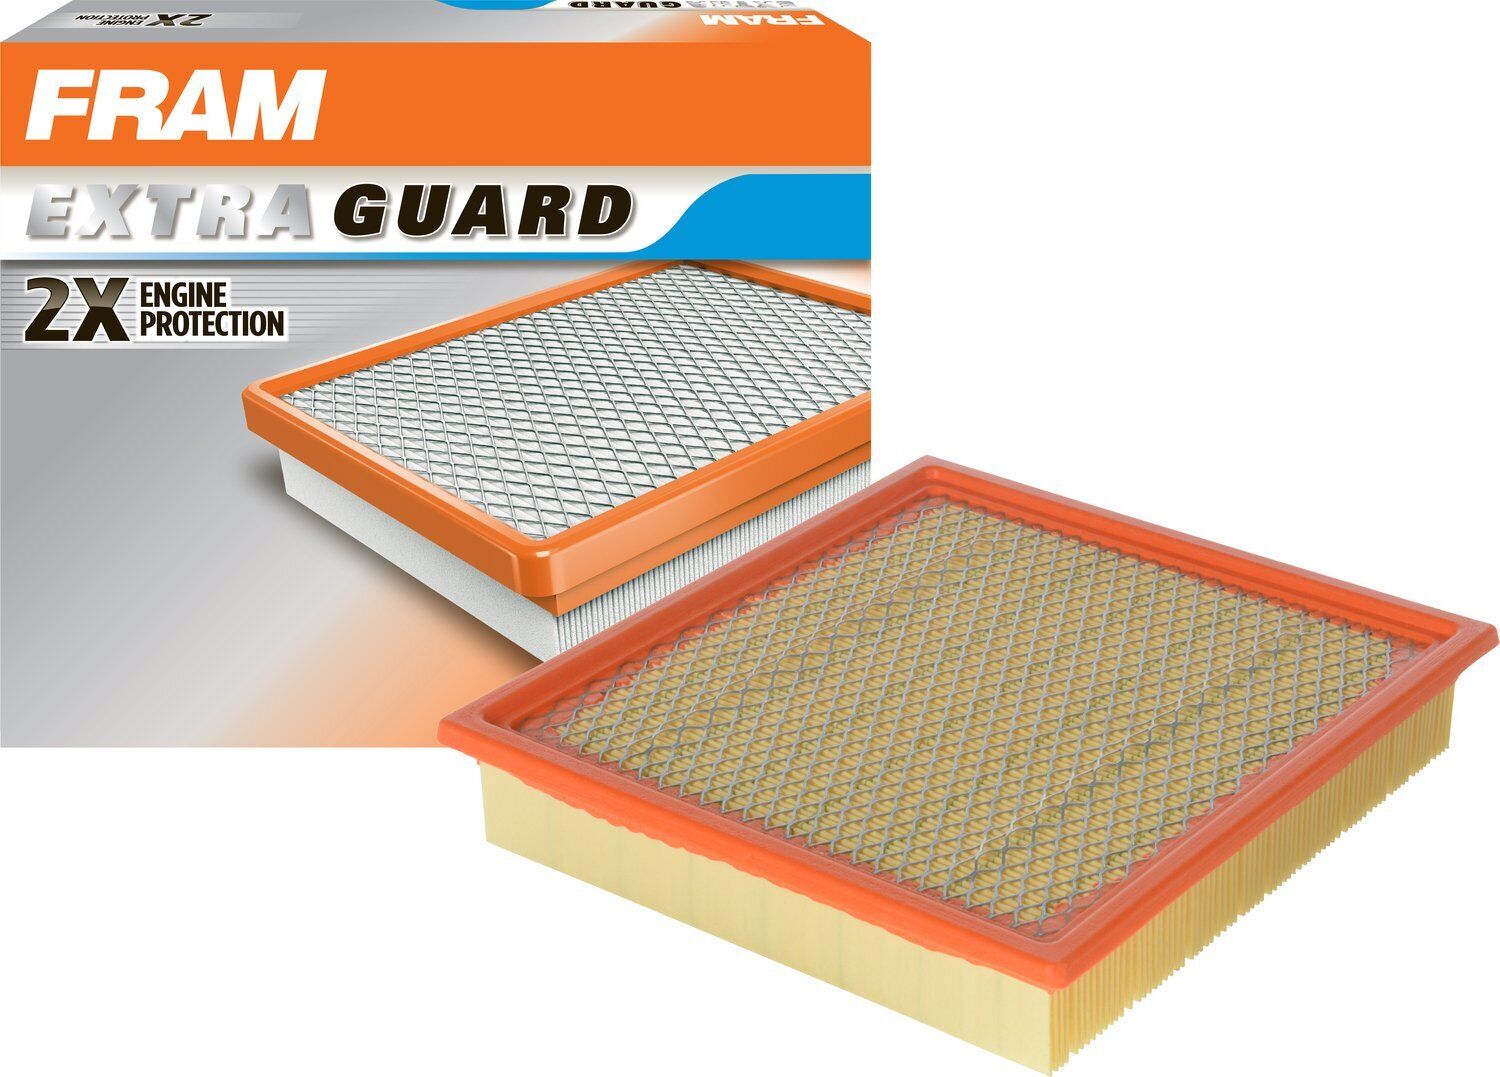 FRAM Extra Guard Air Filter, CA10262 for Select Ford and 1 White 